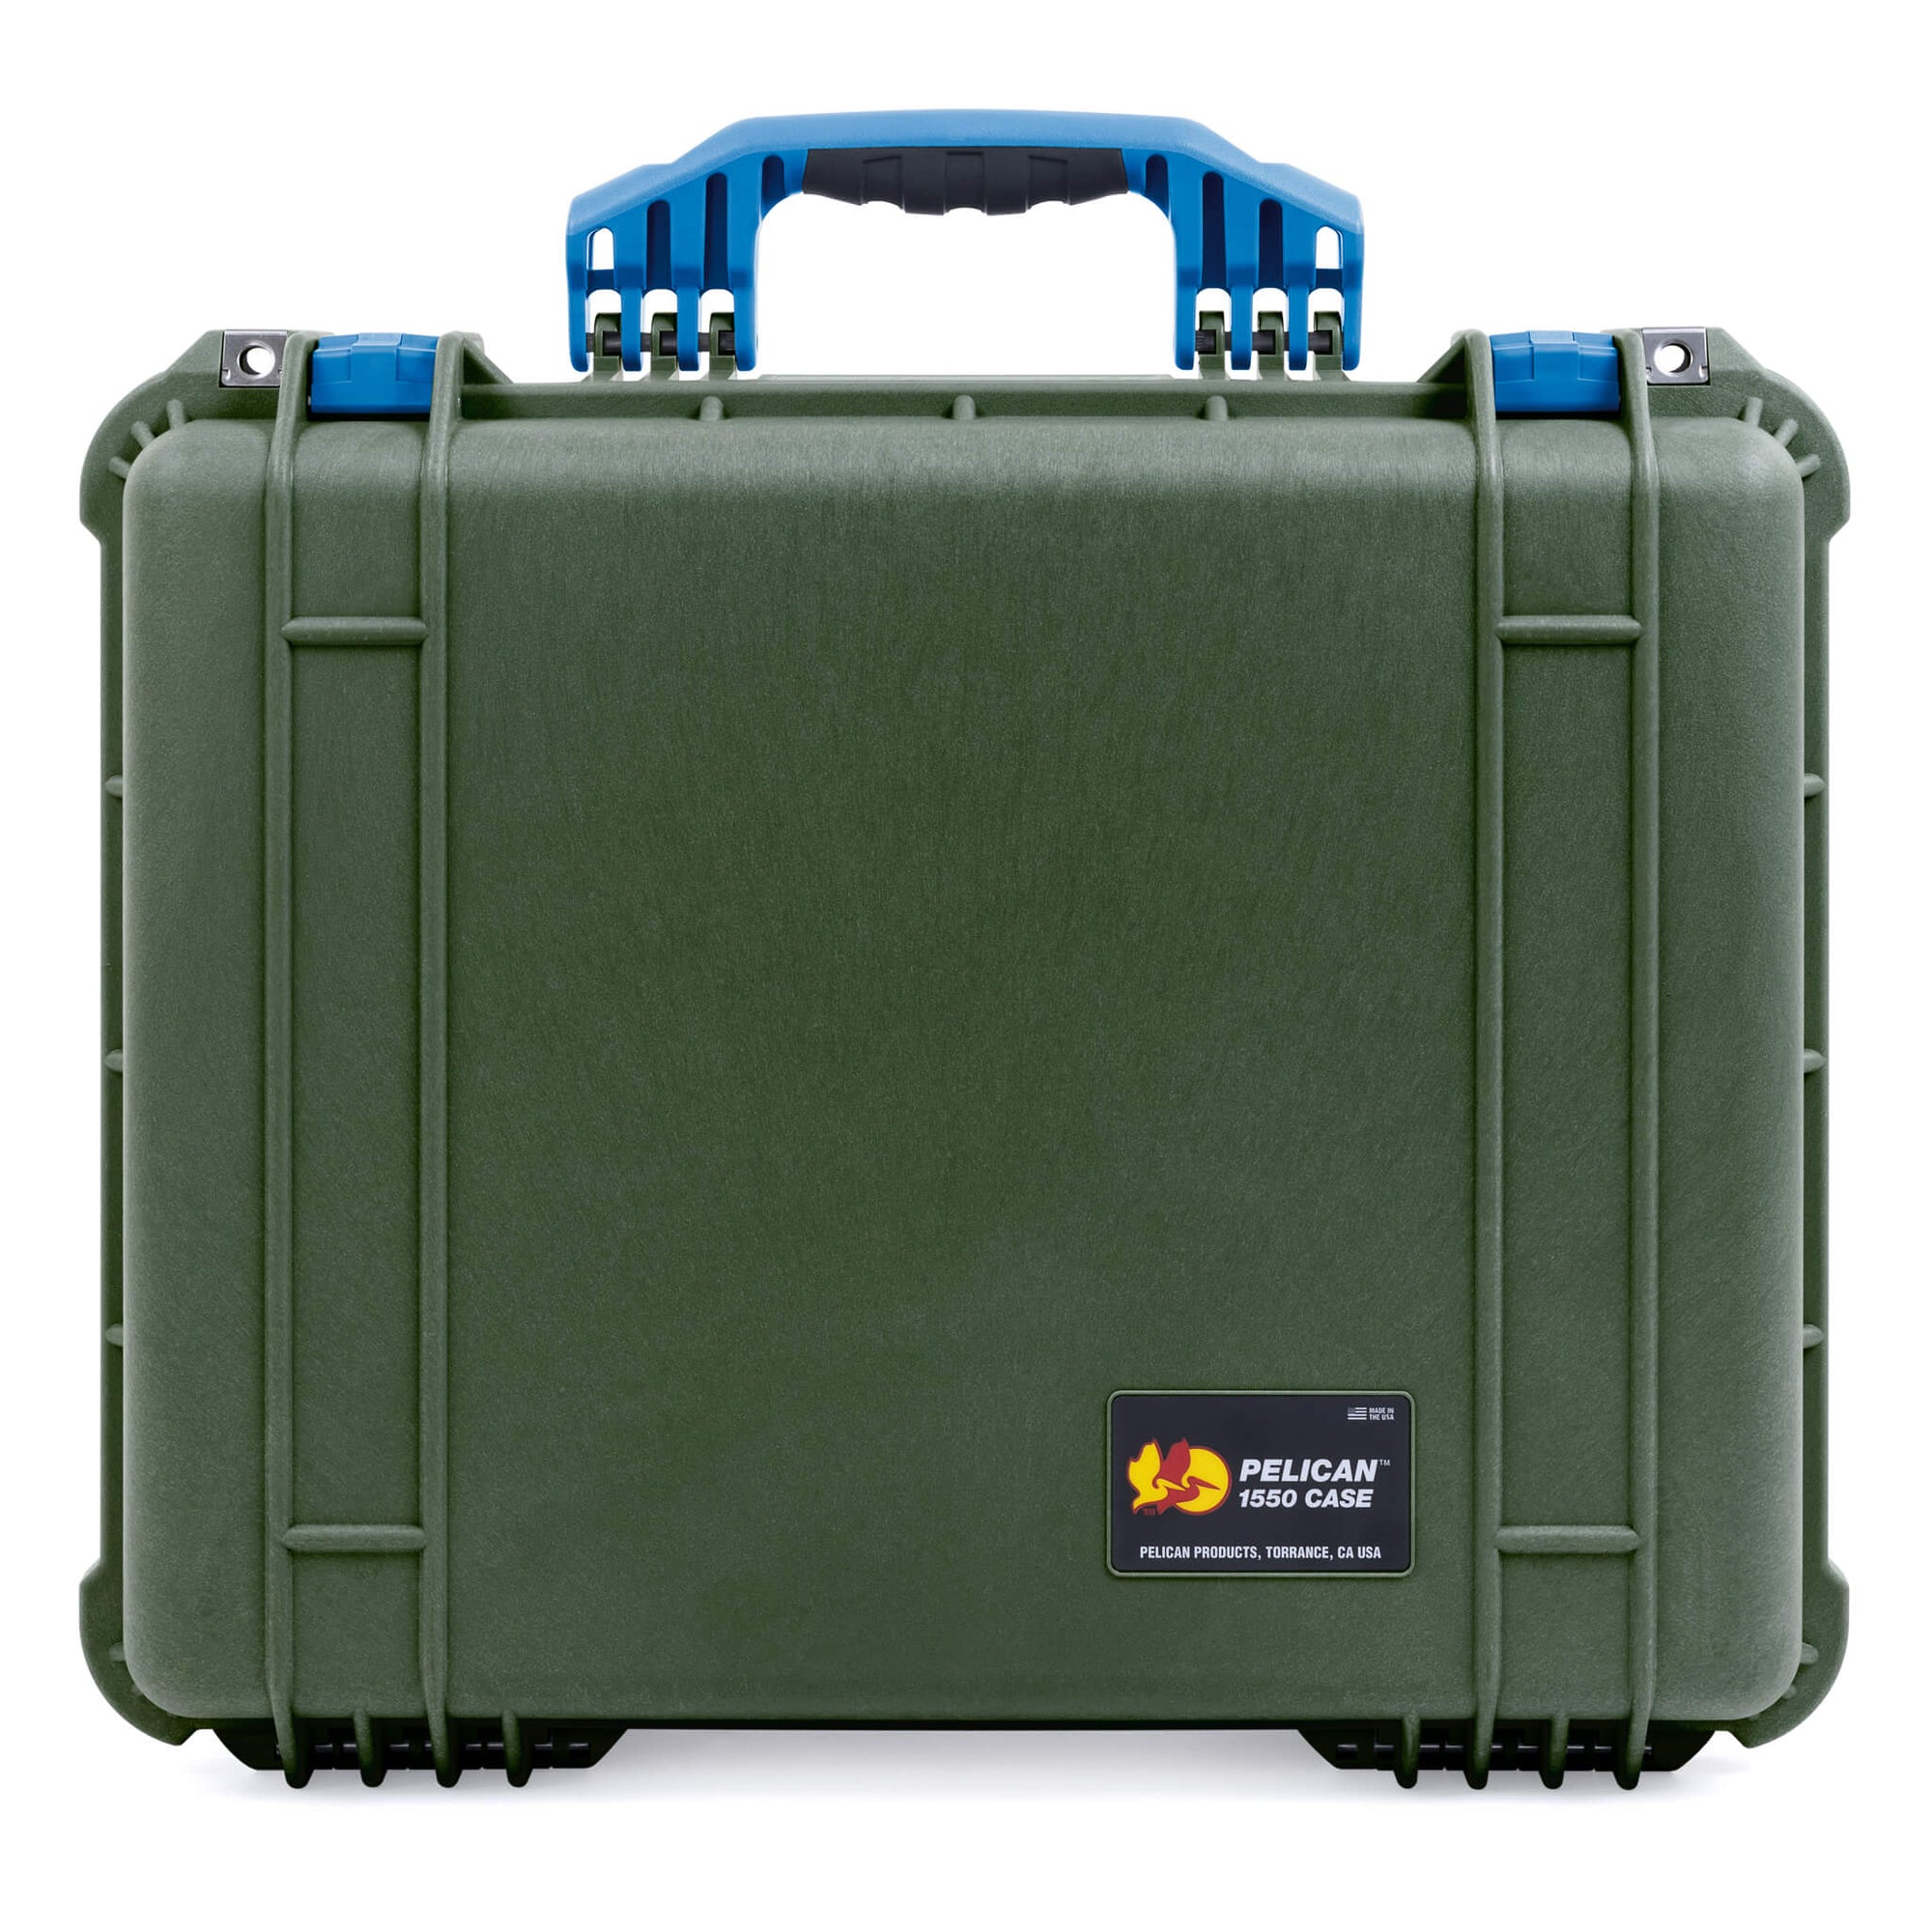 Pelican 1550 Case, OD Green with Blue Handle & Latches ColorCase 